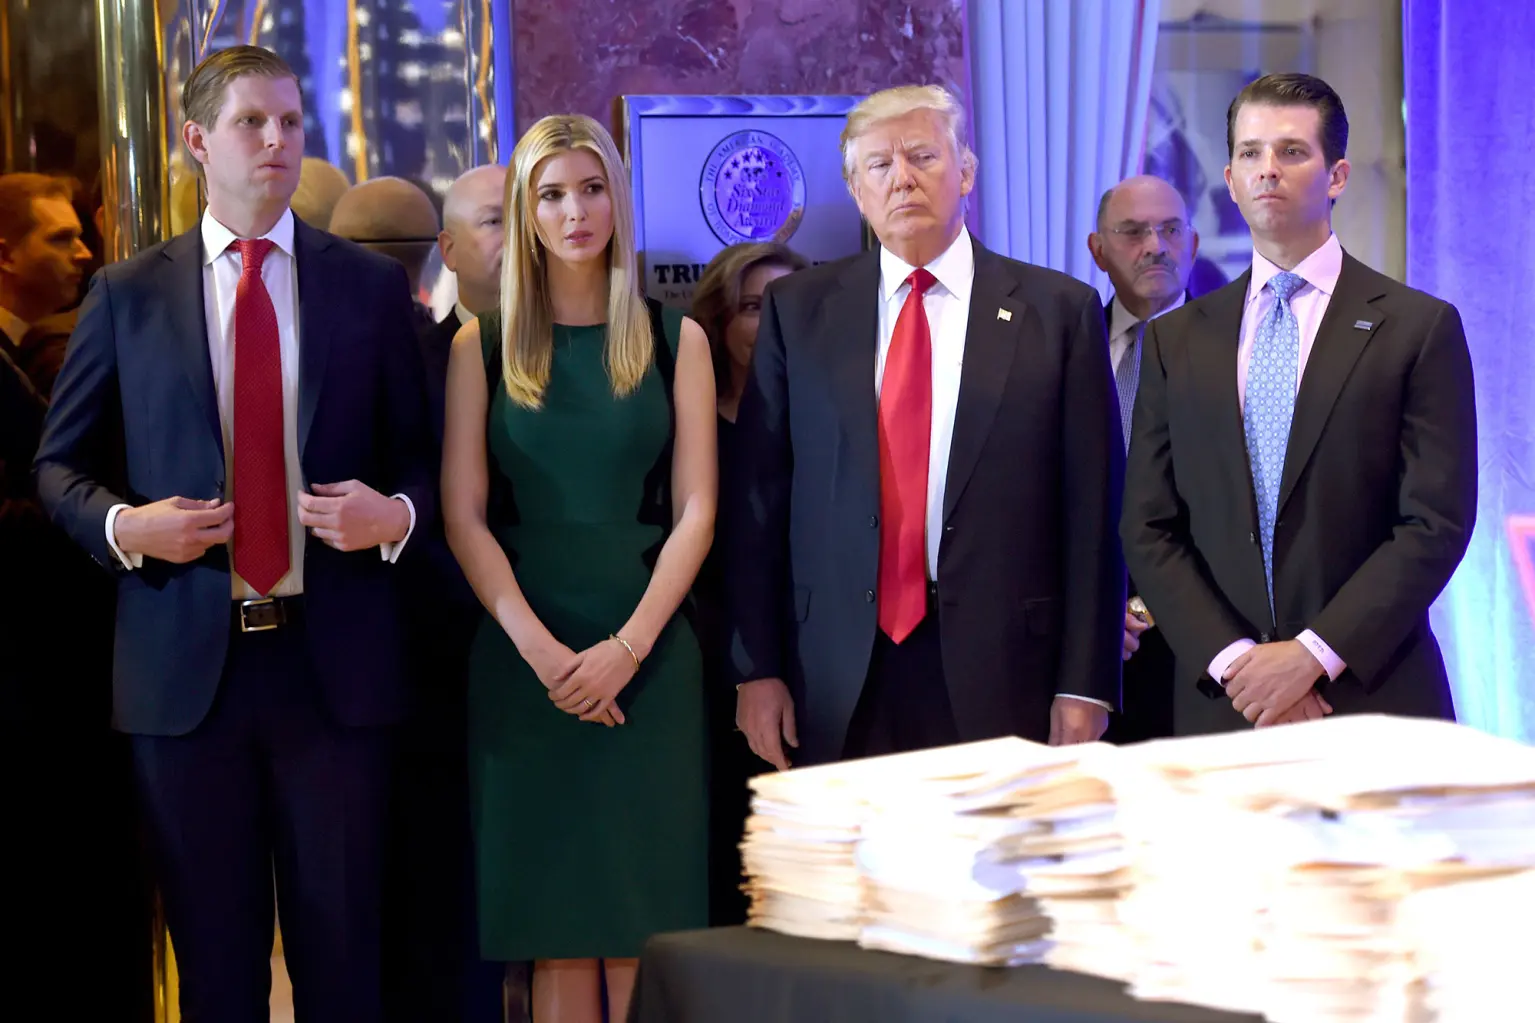 The AG claims Trump, three of his kids and company employees made fraudulent representations about Trump’s financial condition.